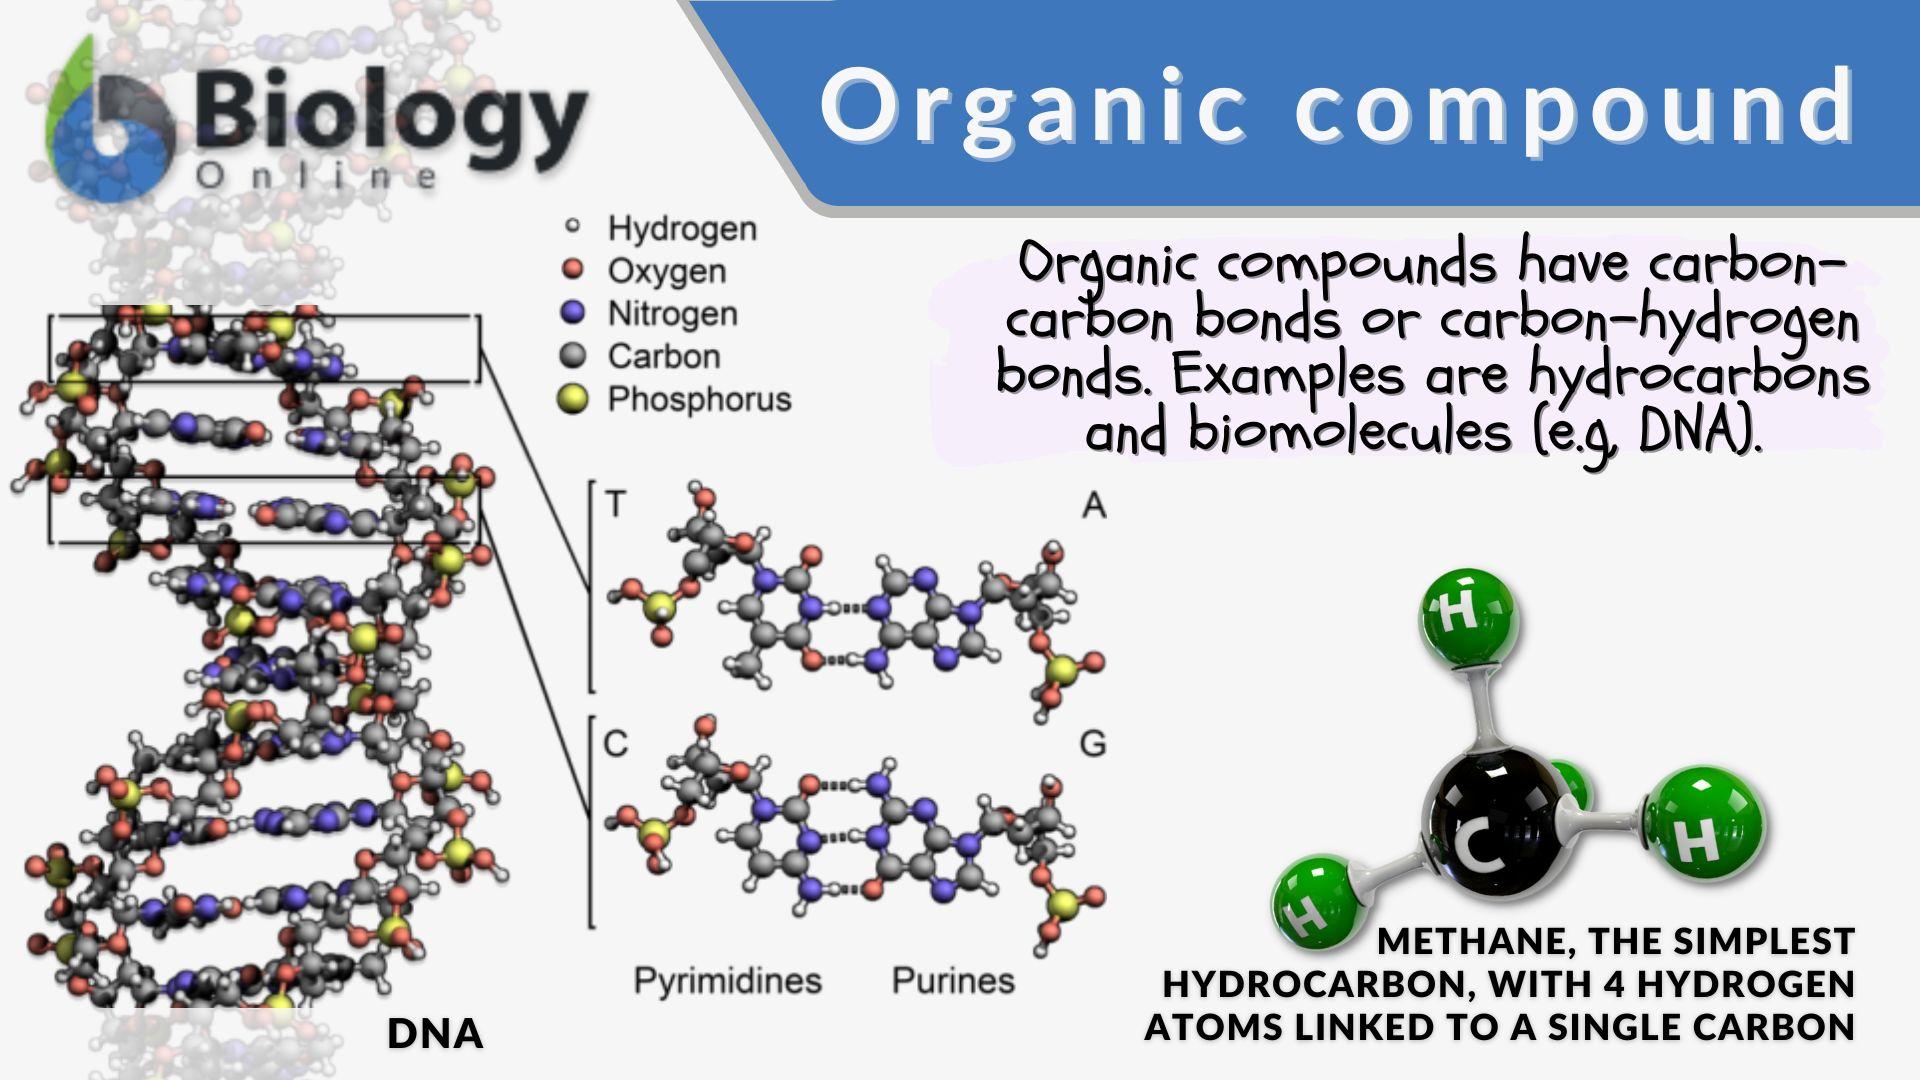 Organic compound - Definition and Examples - Biology Online Dictionary